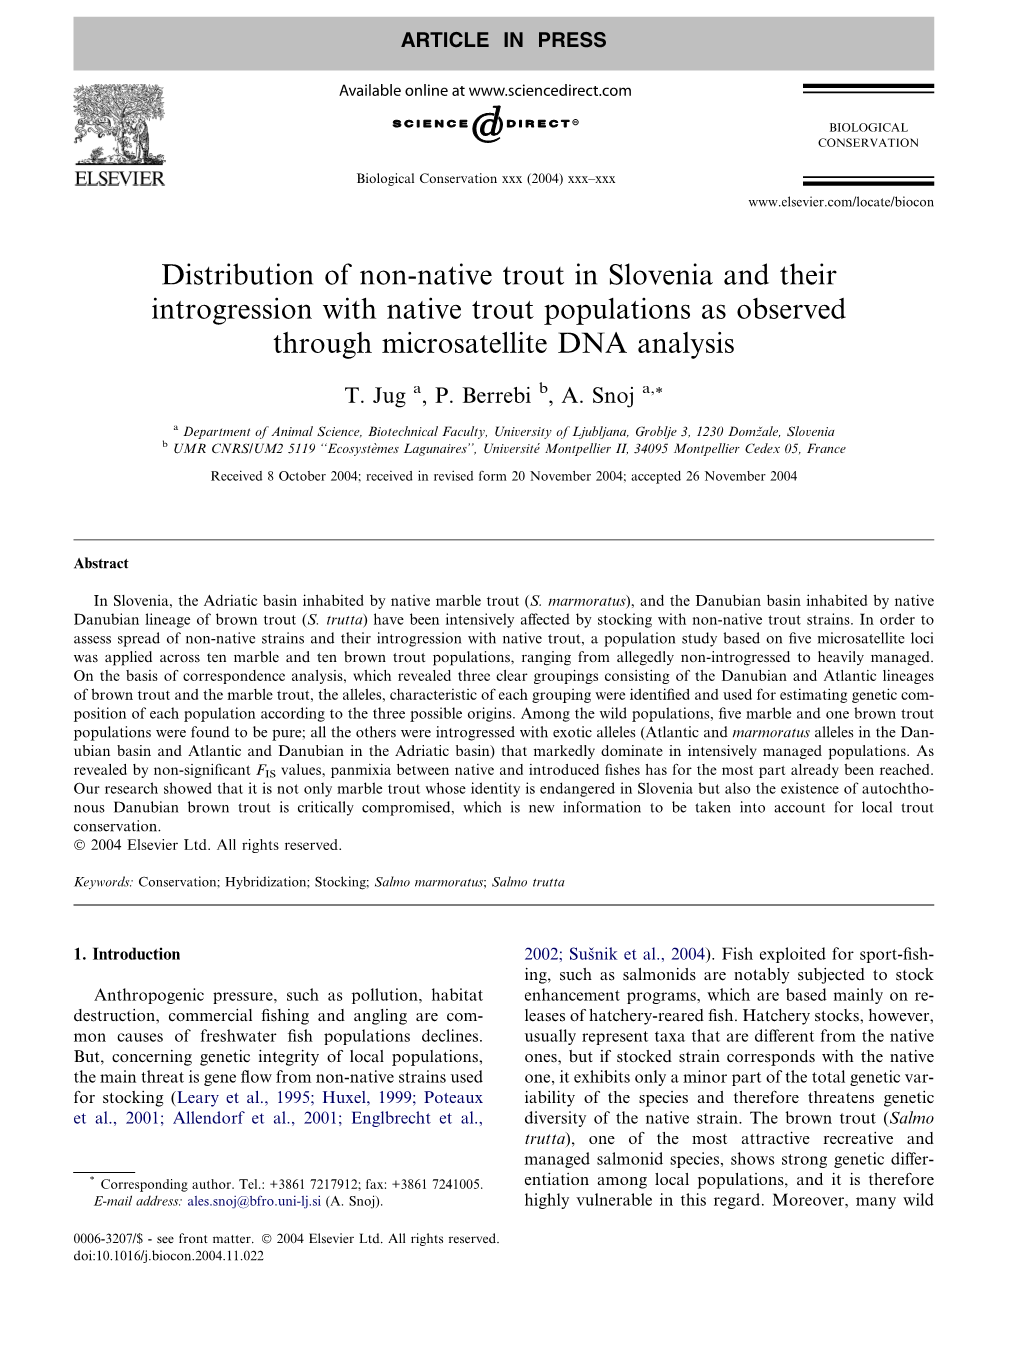 Distribution of Non-Native Trout in Slovenia and Their Introgression with Native Trout Populations As Observed Through Microsatellite DNA Analysis